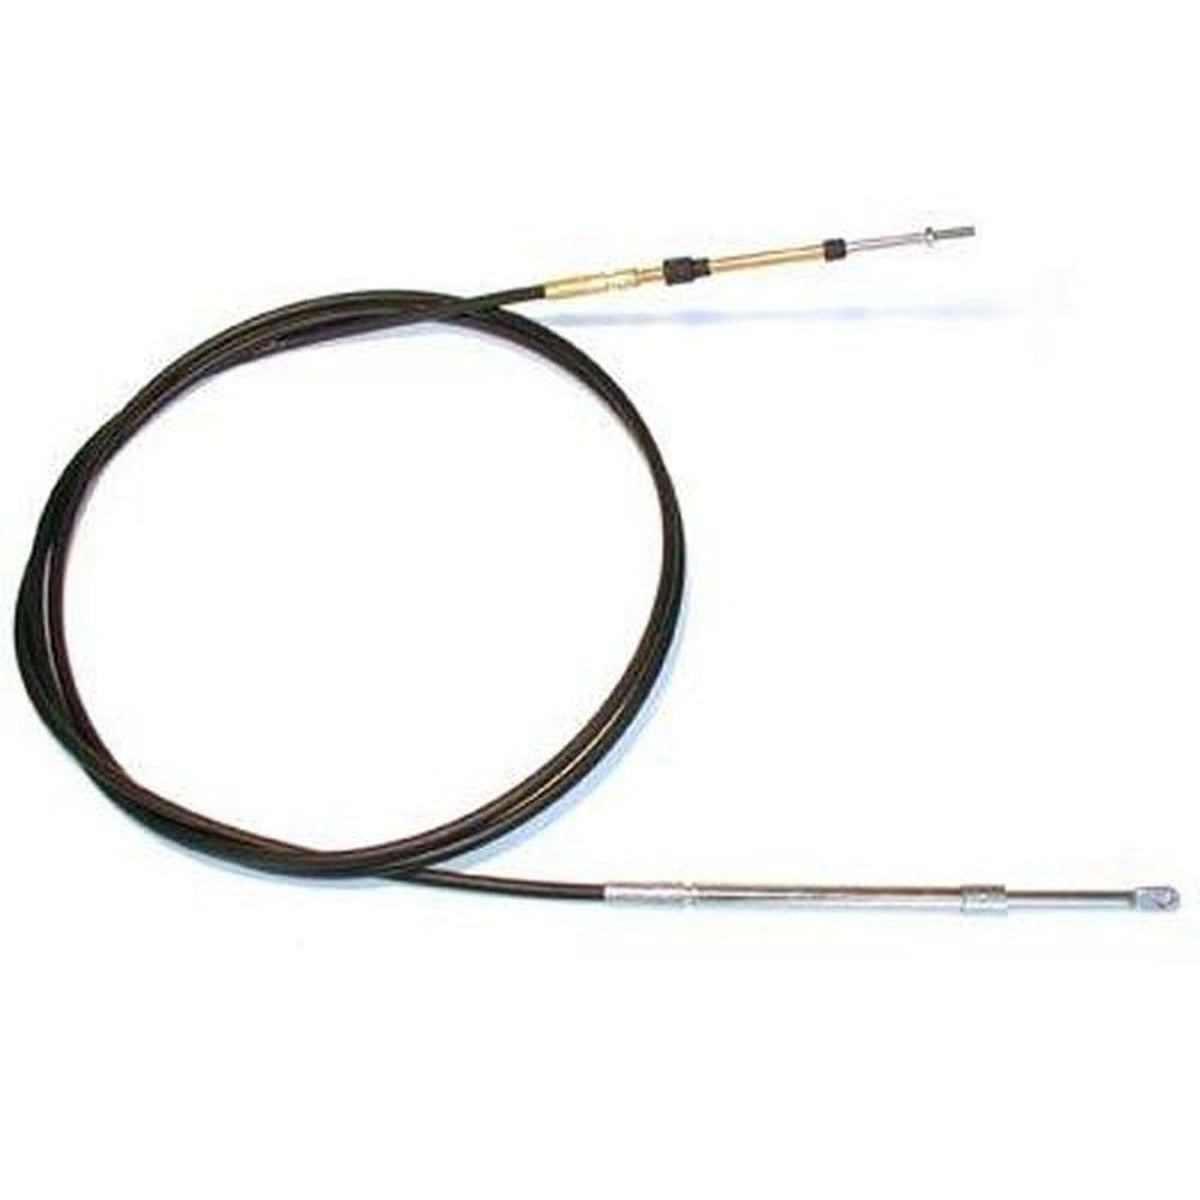 Teleflex Not Qualified for Free Shipping Teleflex 14' Gate Control Cable #CC21314